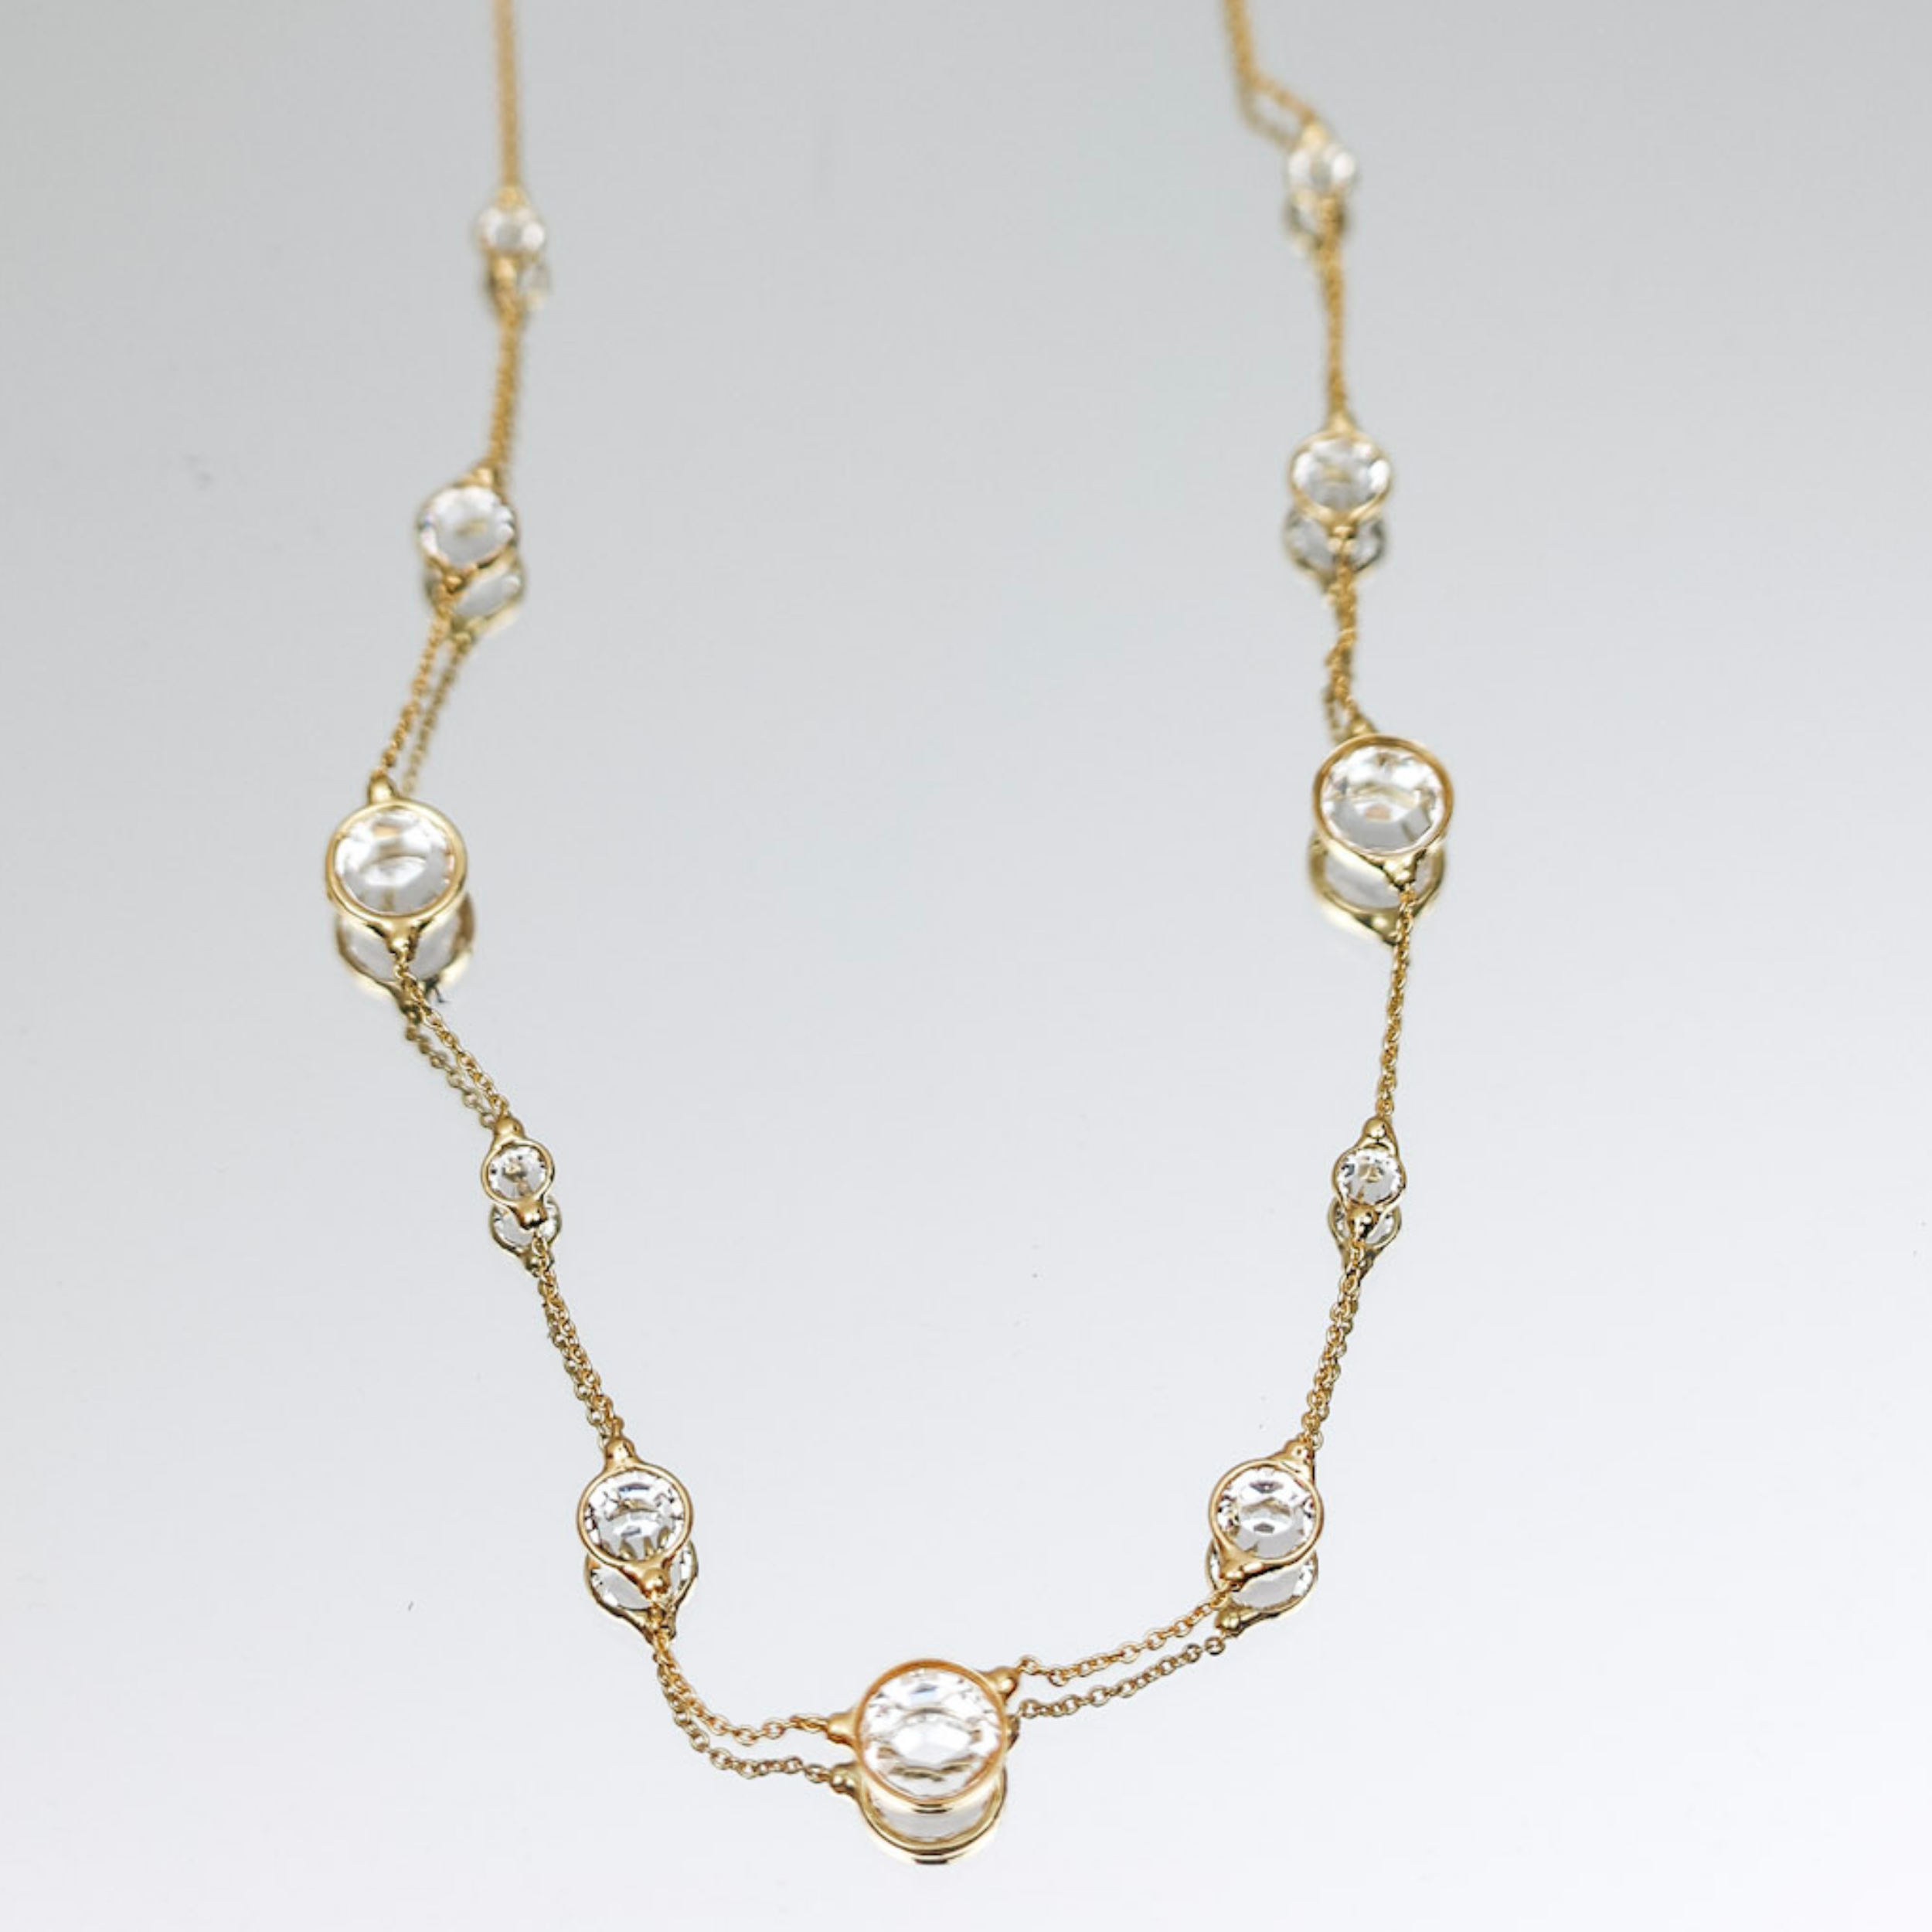 A gold tone necklace with clear circle crystals going around the gold chain.